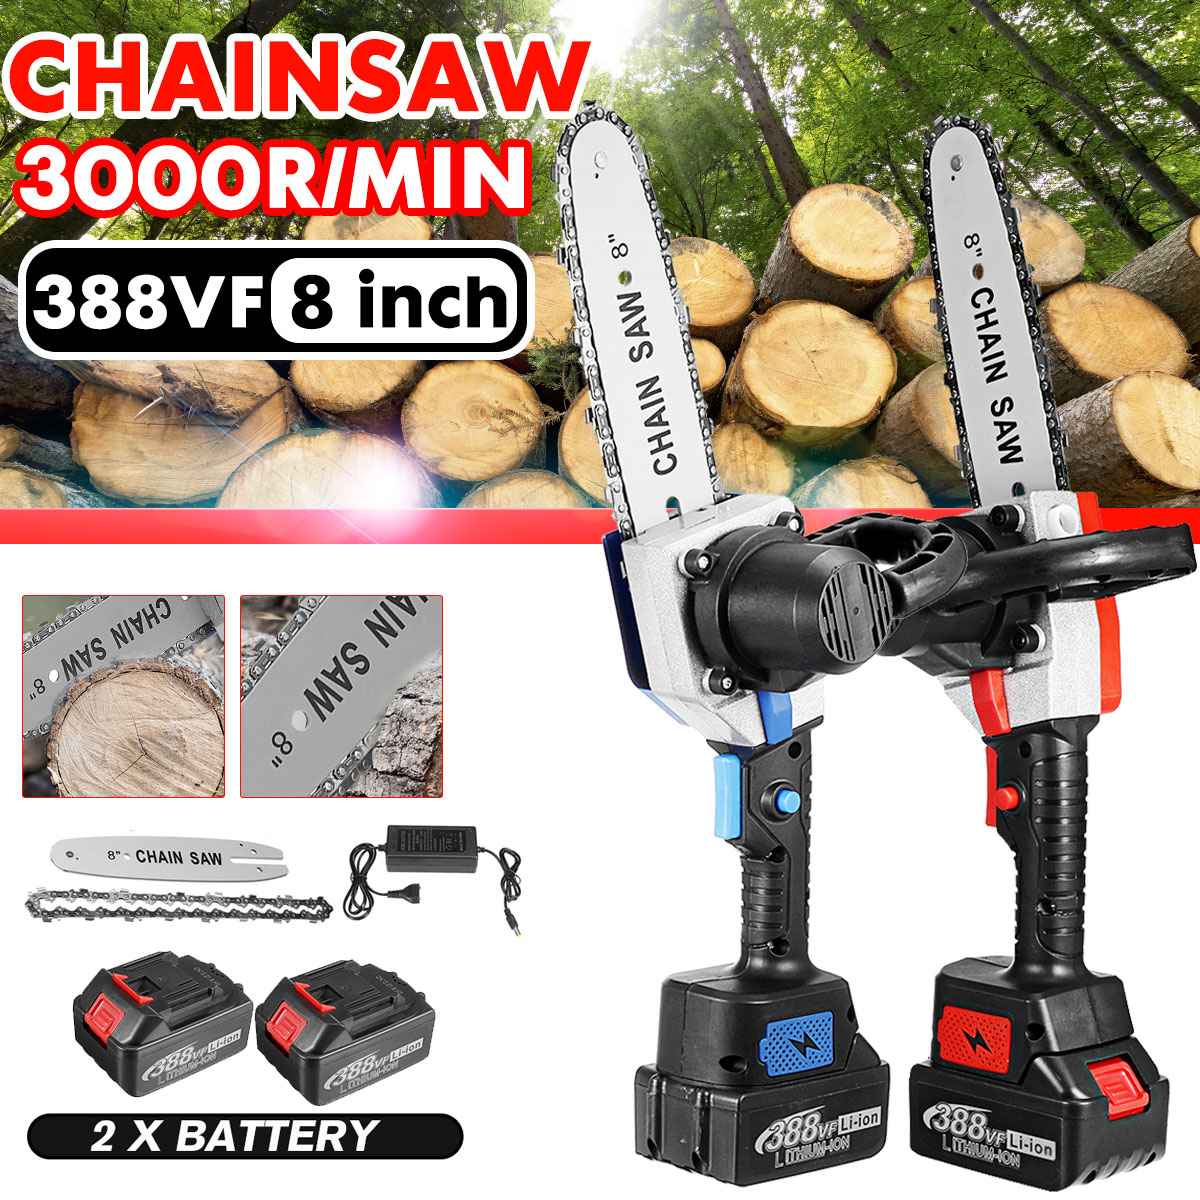 88VF-8-Inch-Cordless-Electric-Chainsaw-Wood-Cutter-Saw-Rechargeable-Woodworking-Tool-W-None12-Batter-1868739-1